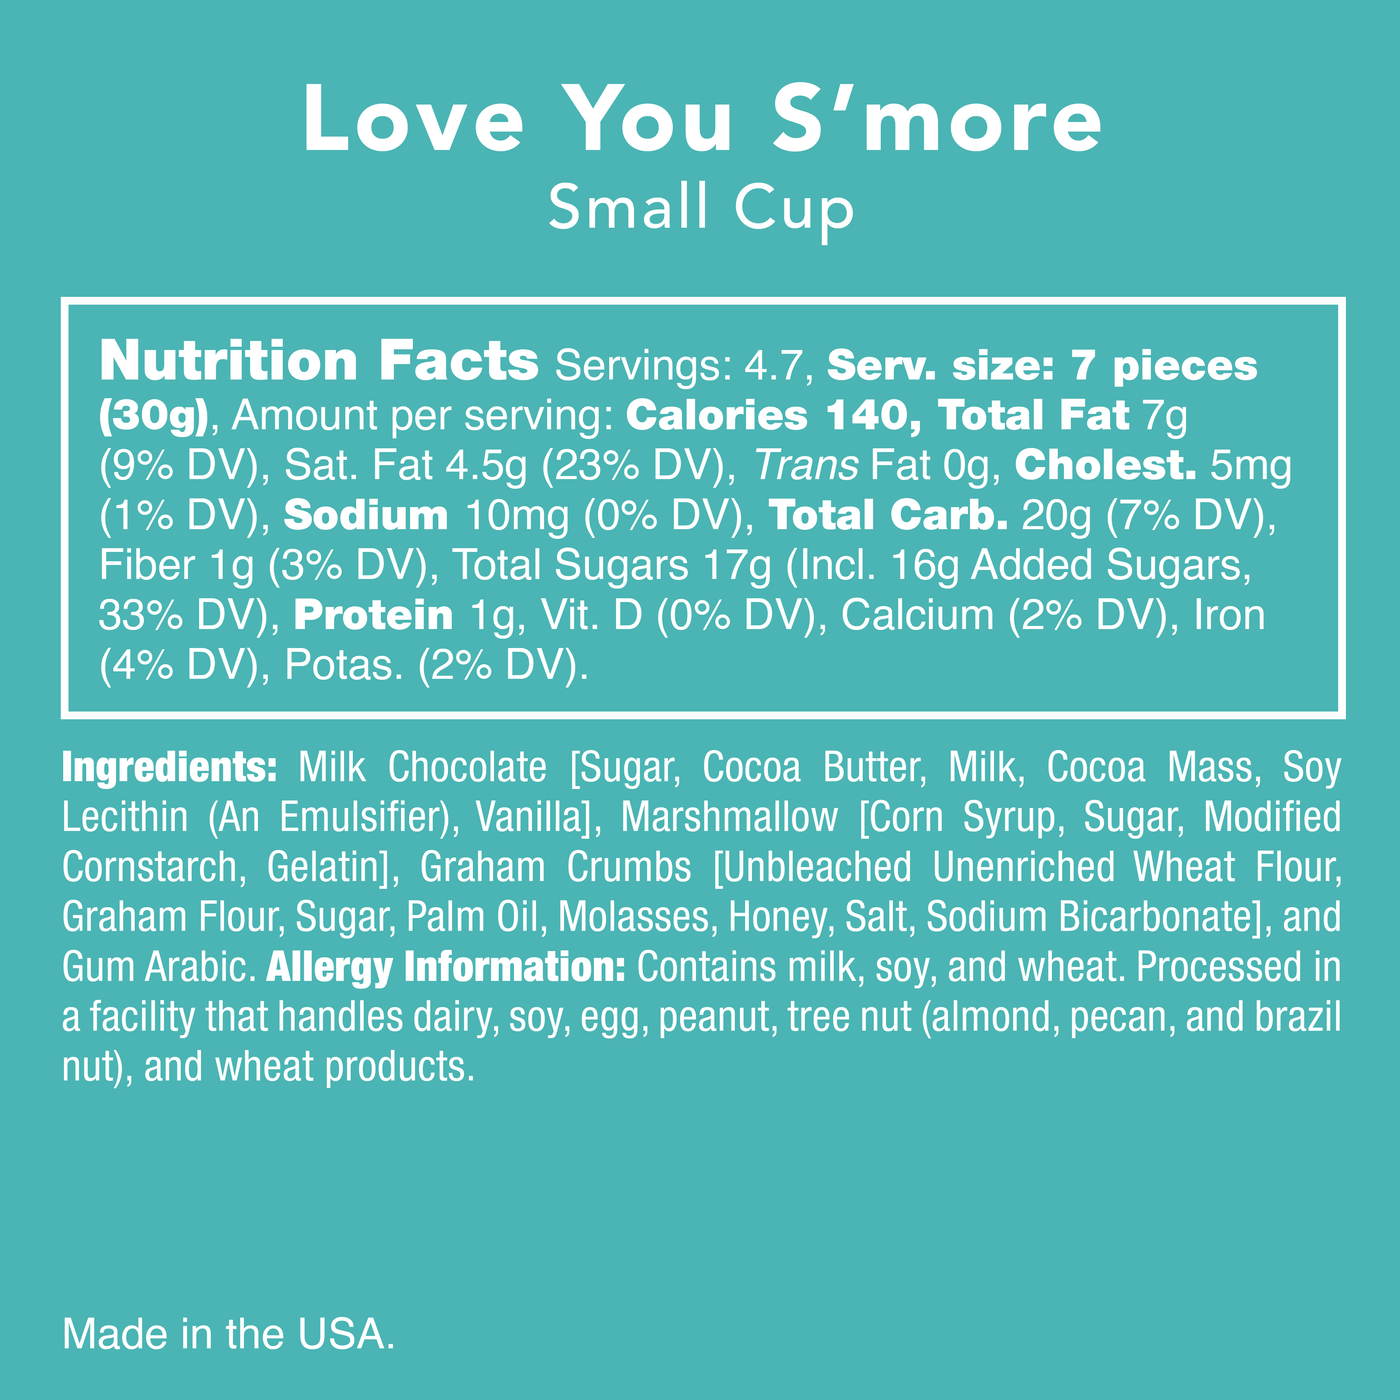 Candy Club Love You S'more Candy Club Small cup